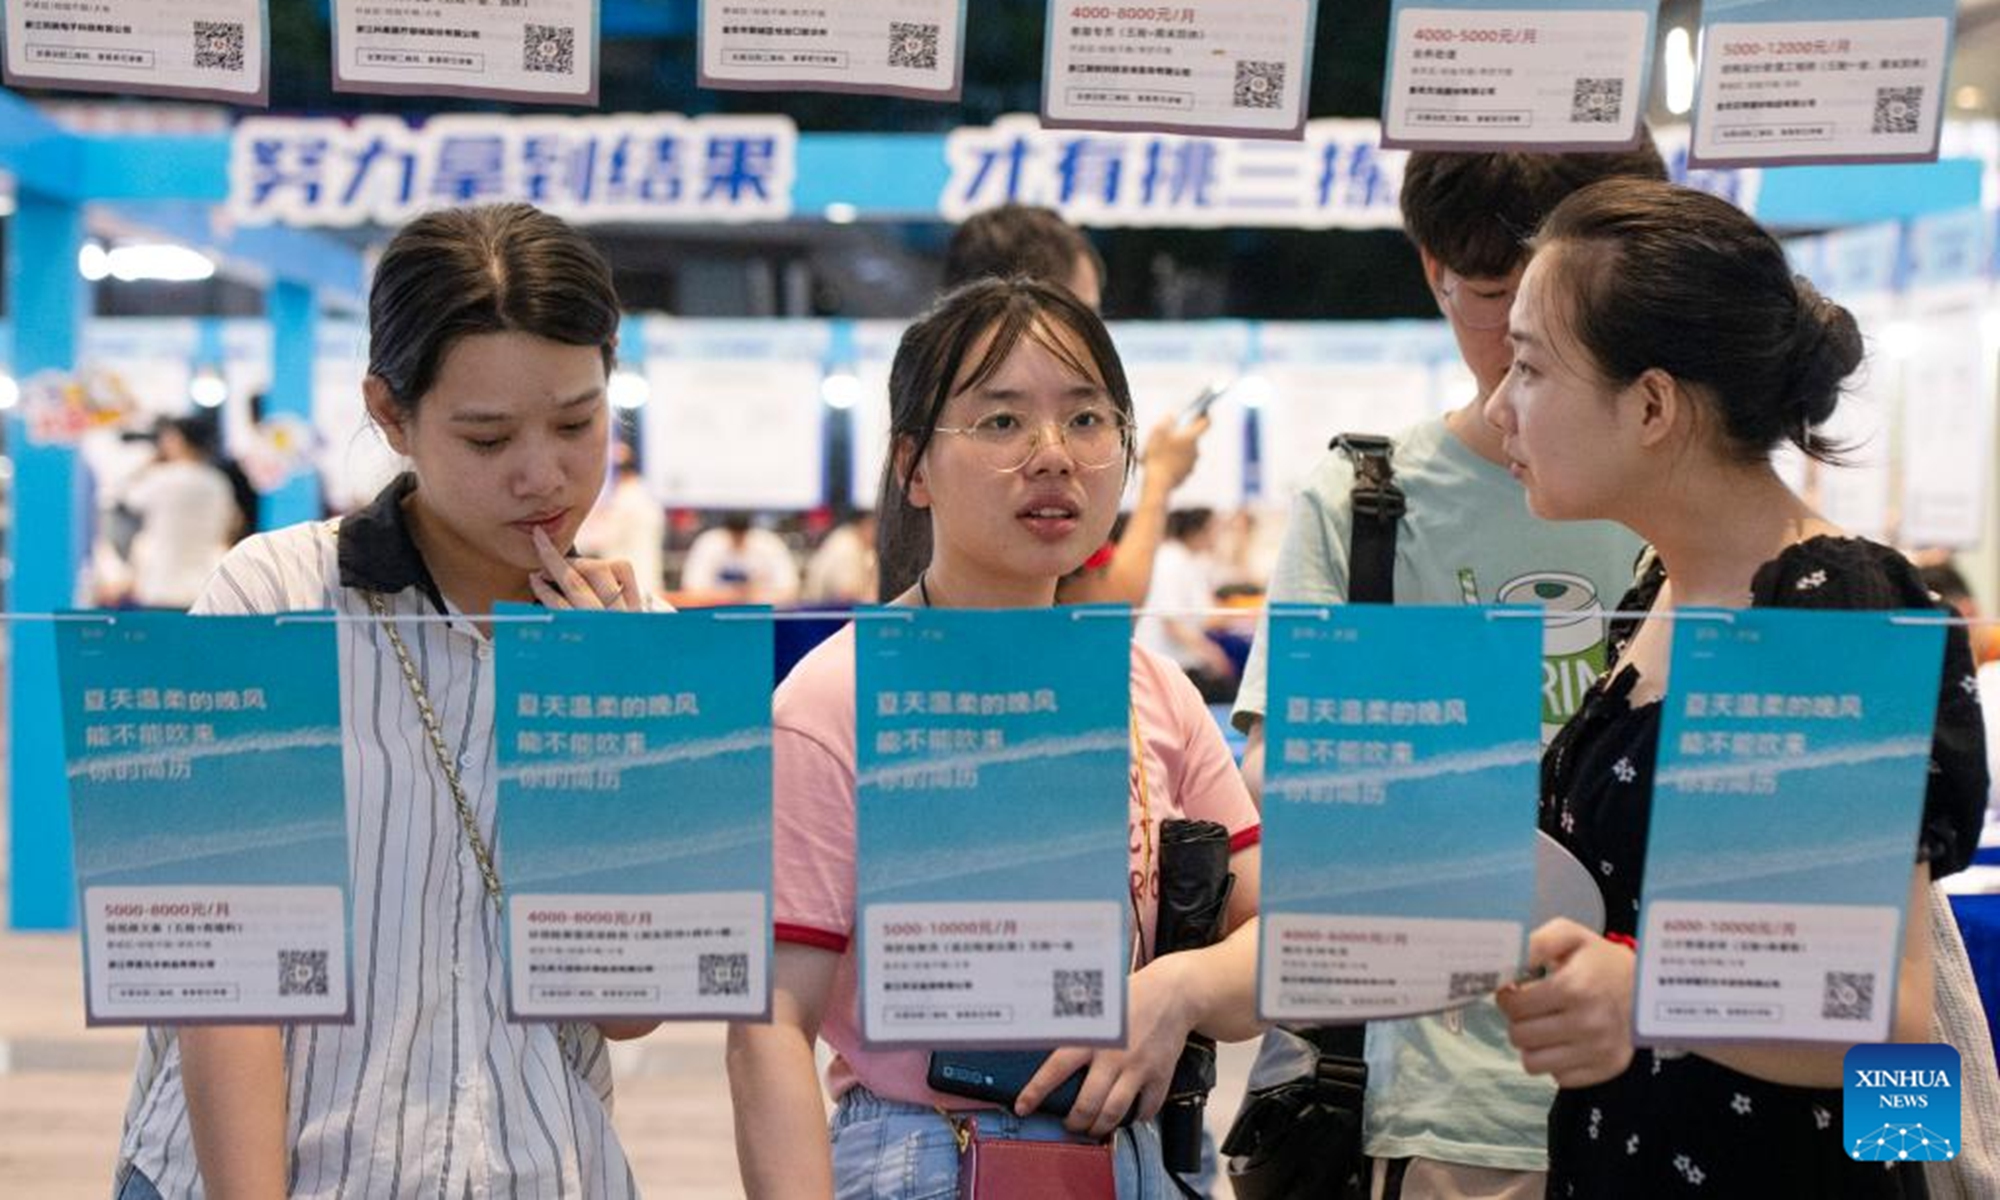 Job seekers read recruitment information at a job fair for college graduates in Jinhua City, east China's Zhejiang Province, July 21, 2023. (Photo: Xinhua)